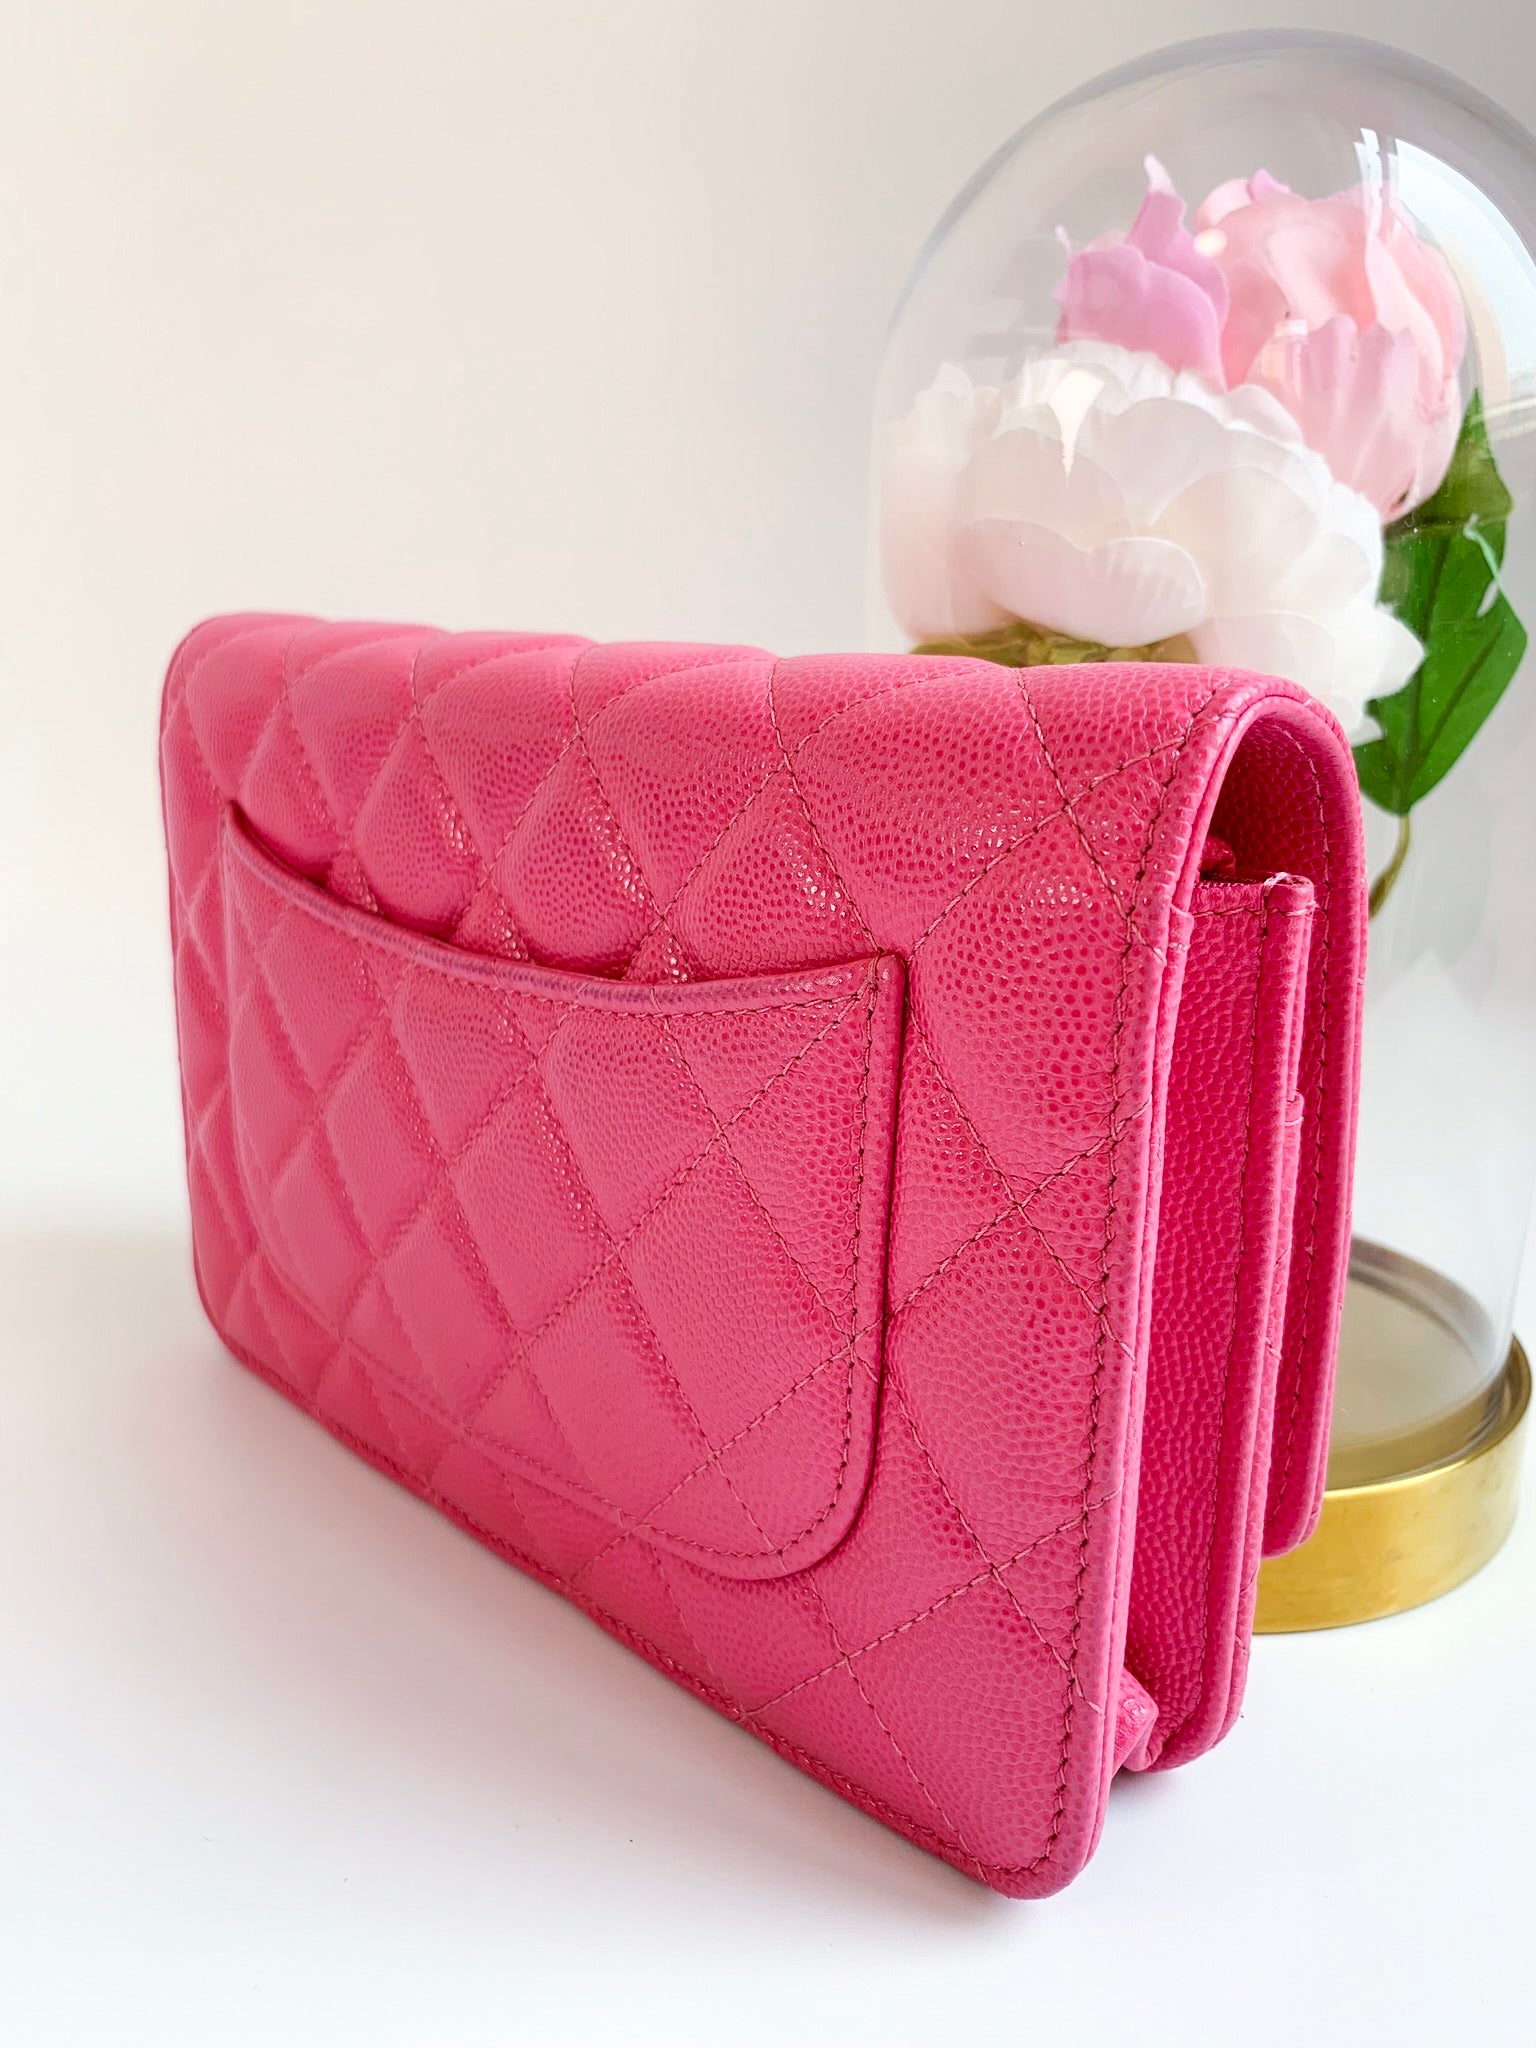 Chanel Lambskin Quilted Wallet On Chain WOC Raspberry